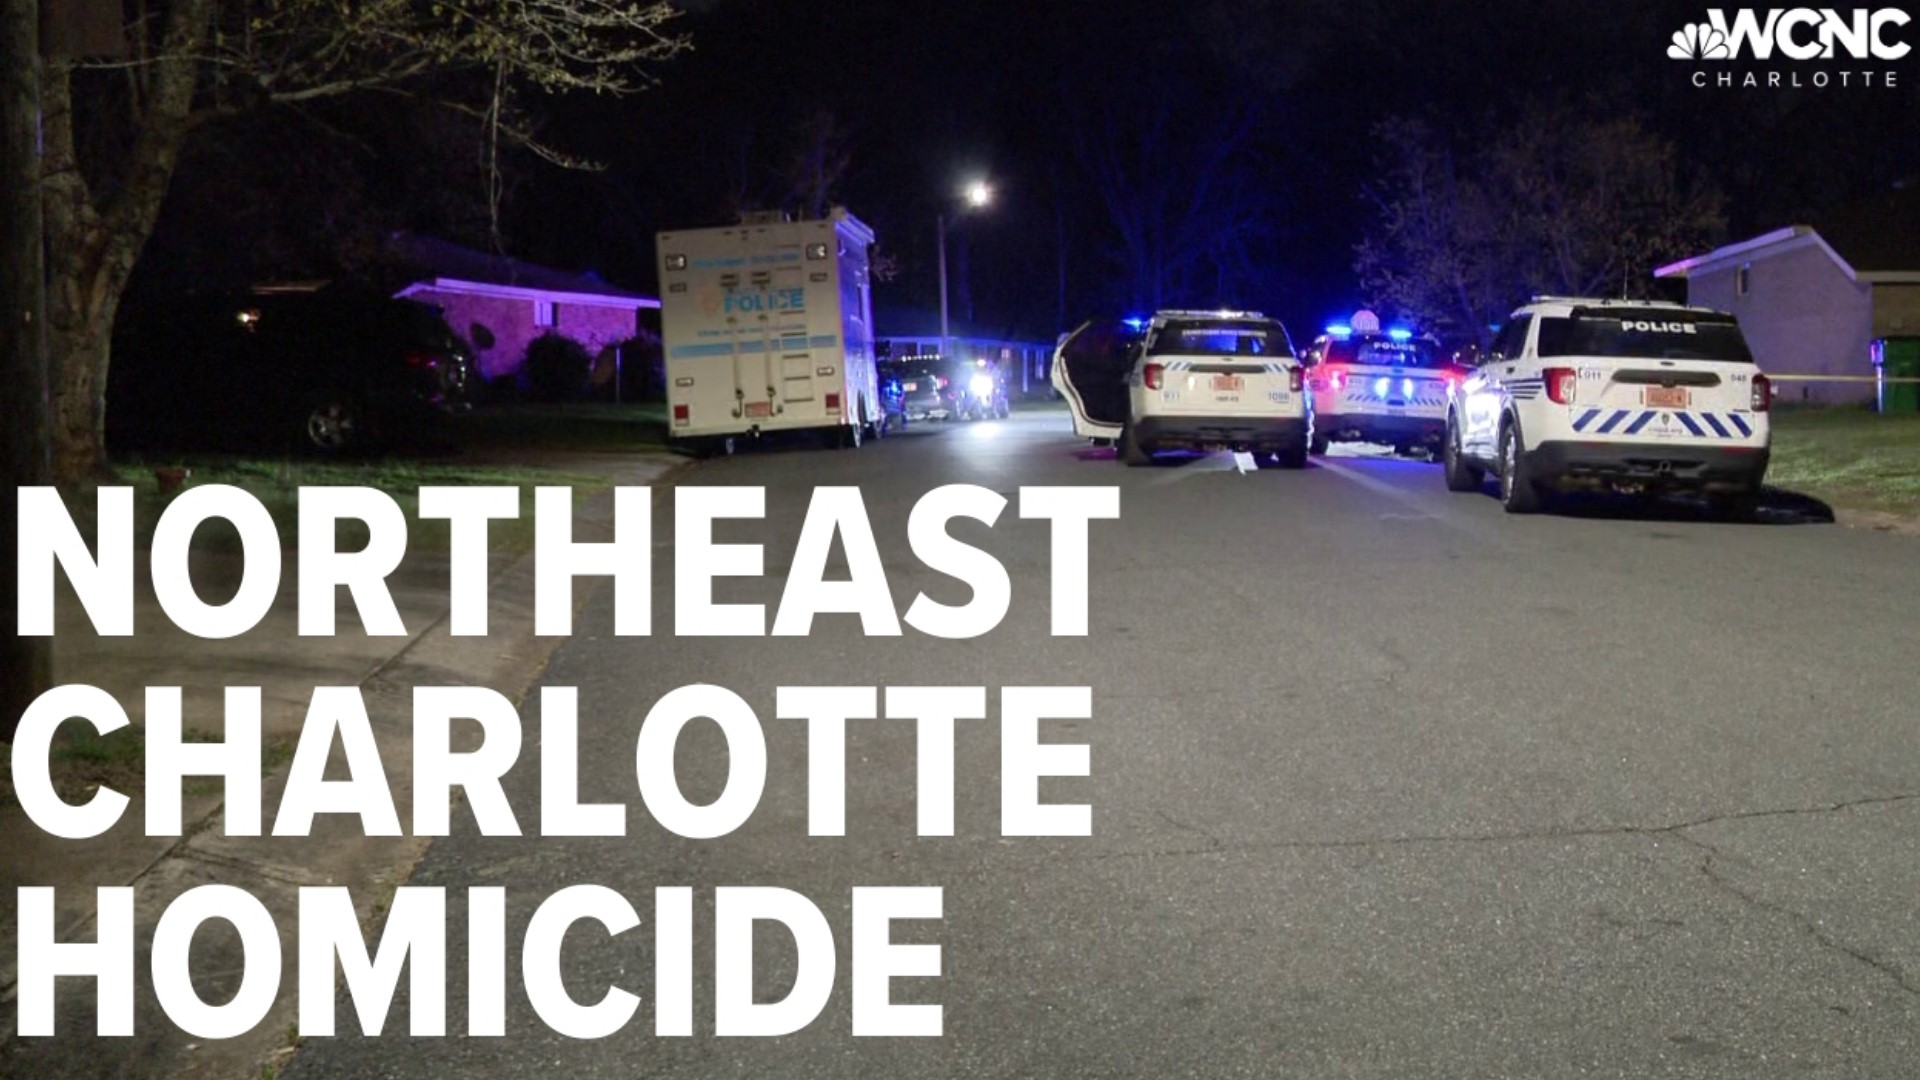 According to the Charlotte-Mecklenburg Police Department, one person was found dead in a home on Malibu Drive near Americana Avenue on Tuesday.